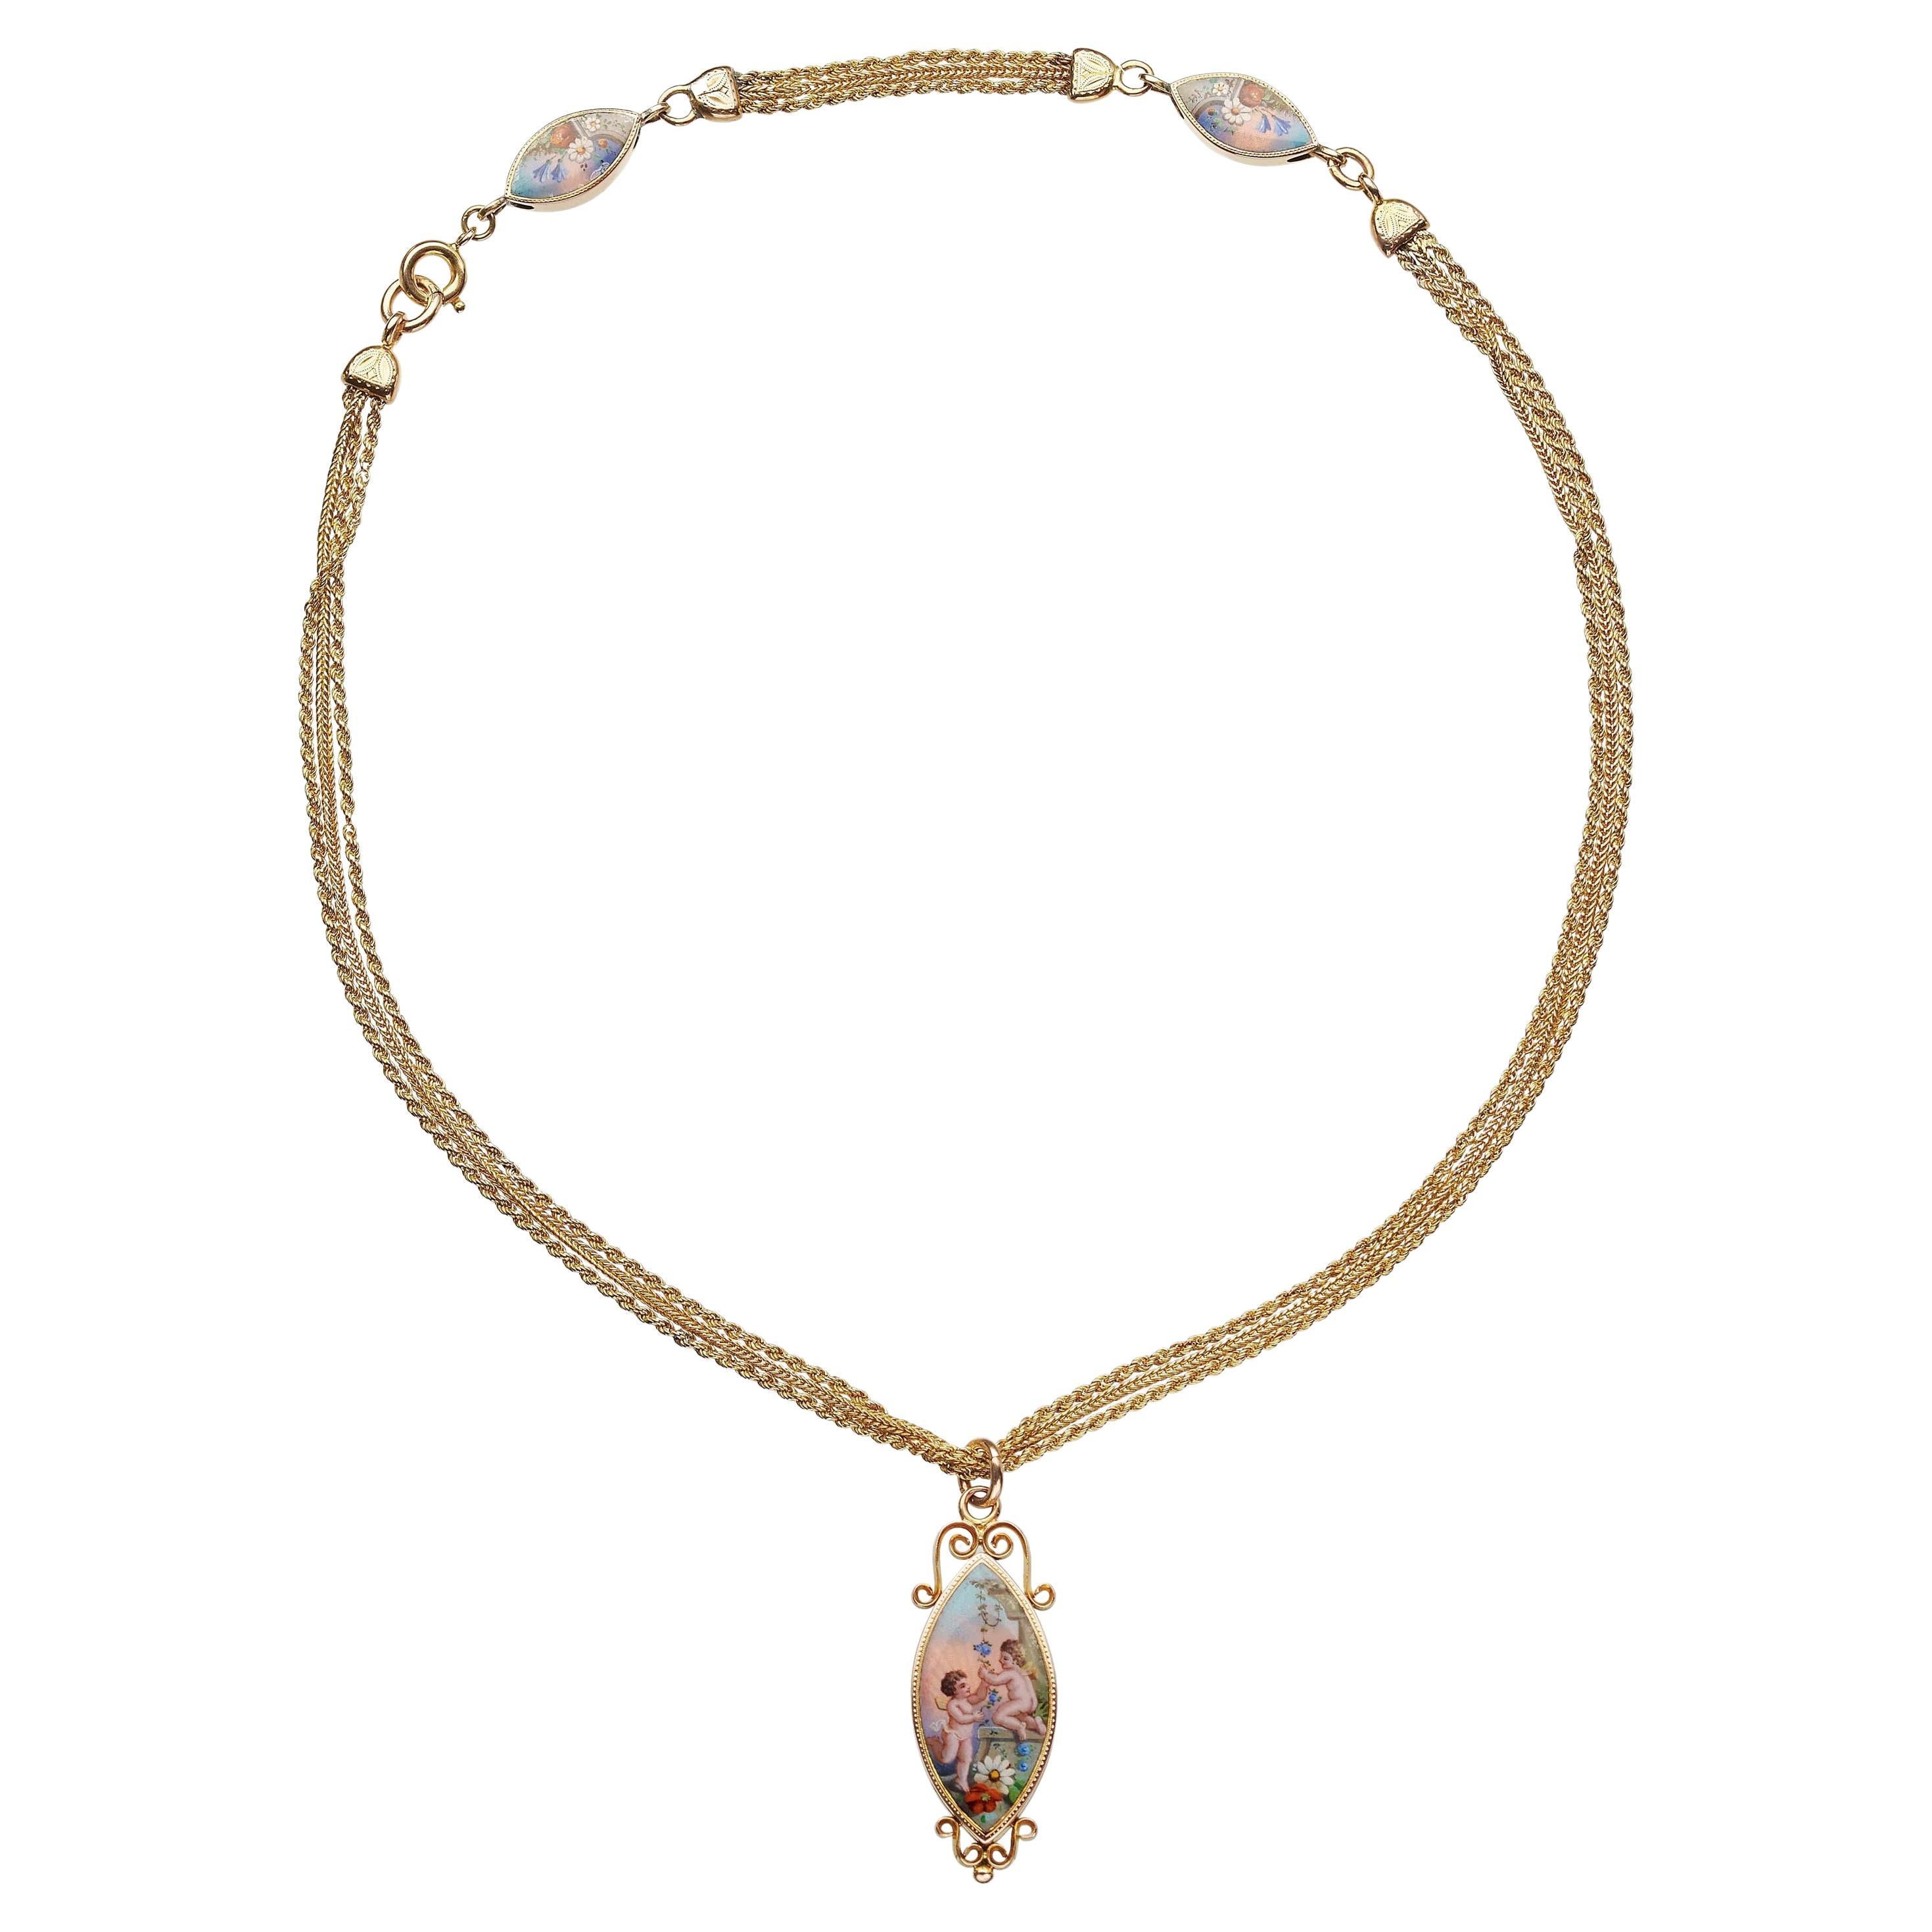 Antique Enamel Navette and Gold Chain Station Necklace, circa 1900